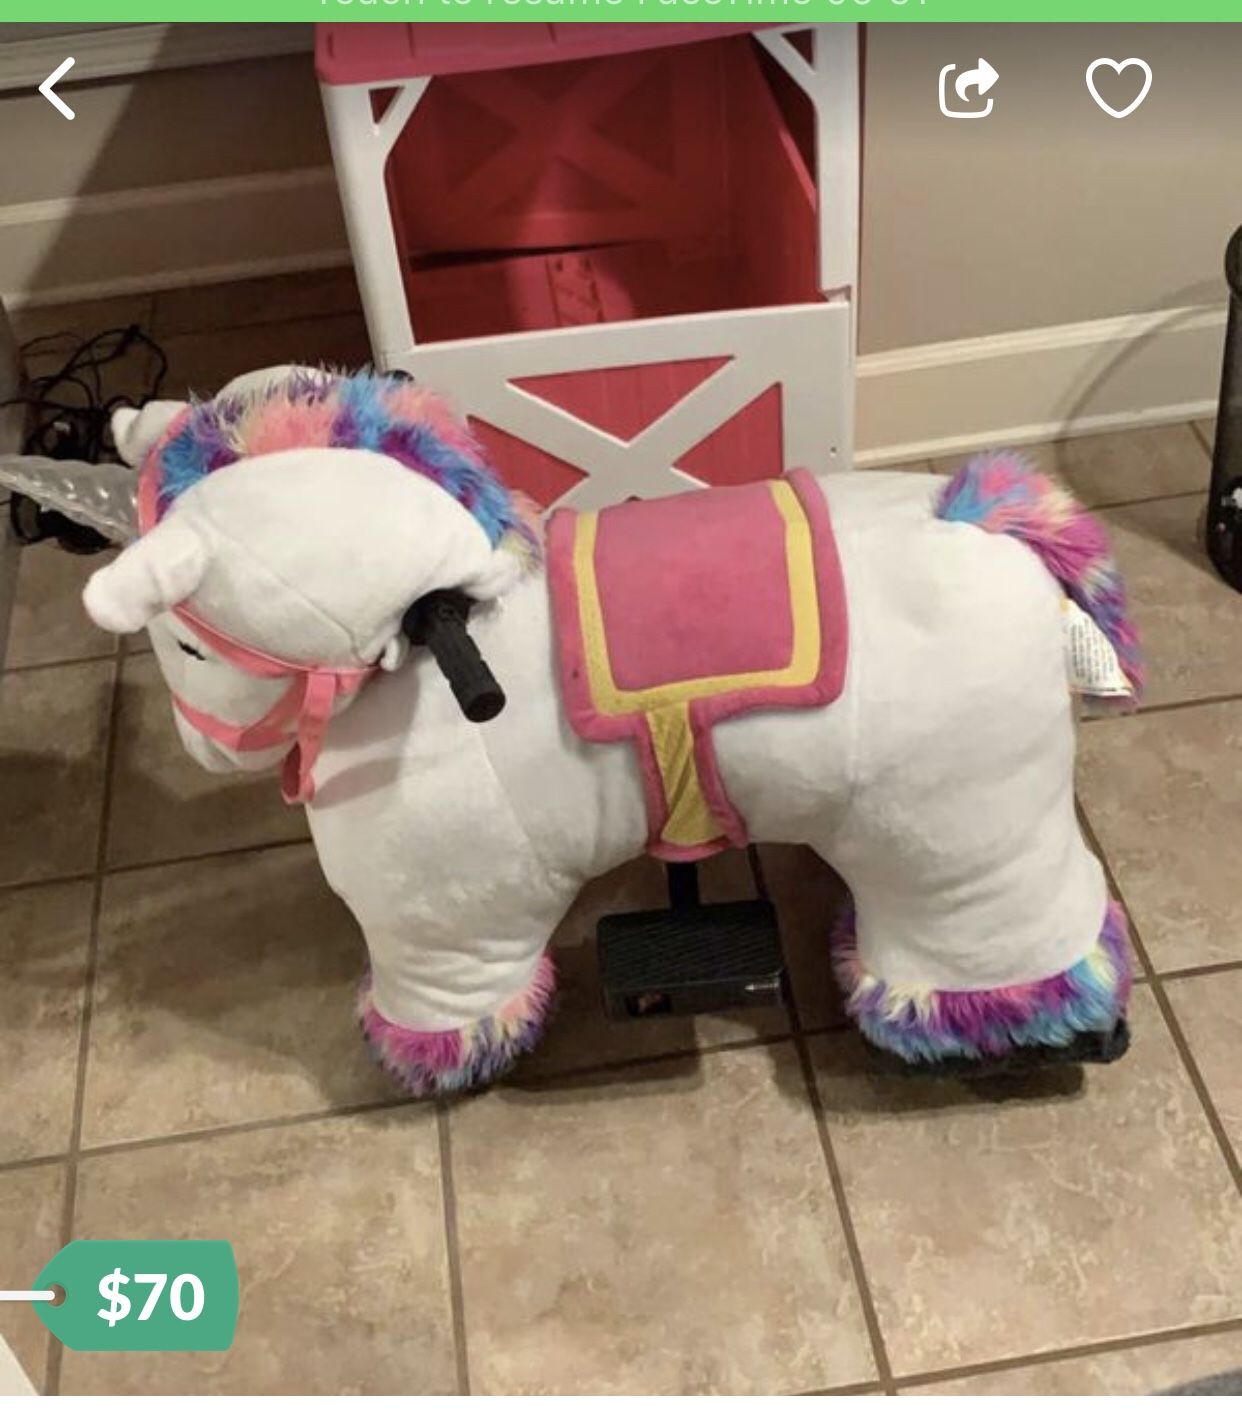 Unicorn(motorized) very good condition with stable.